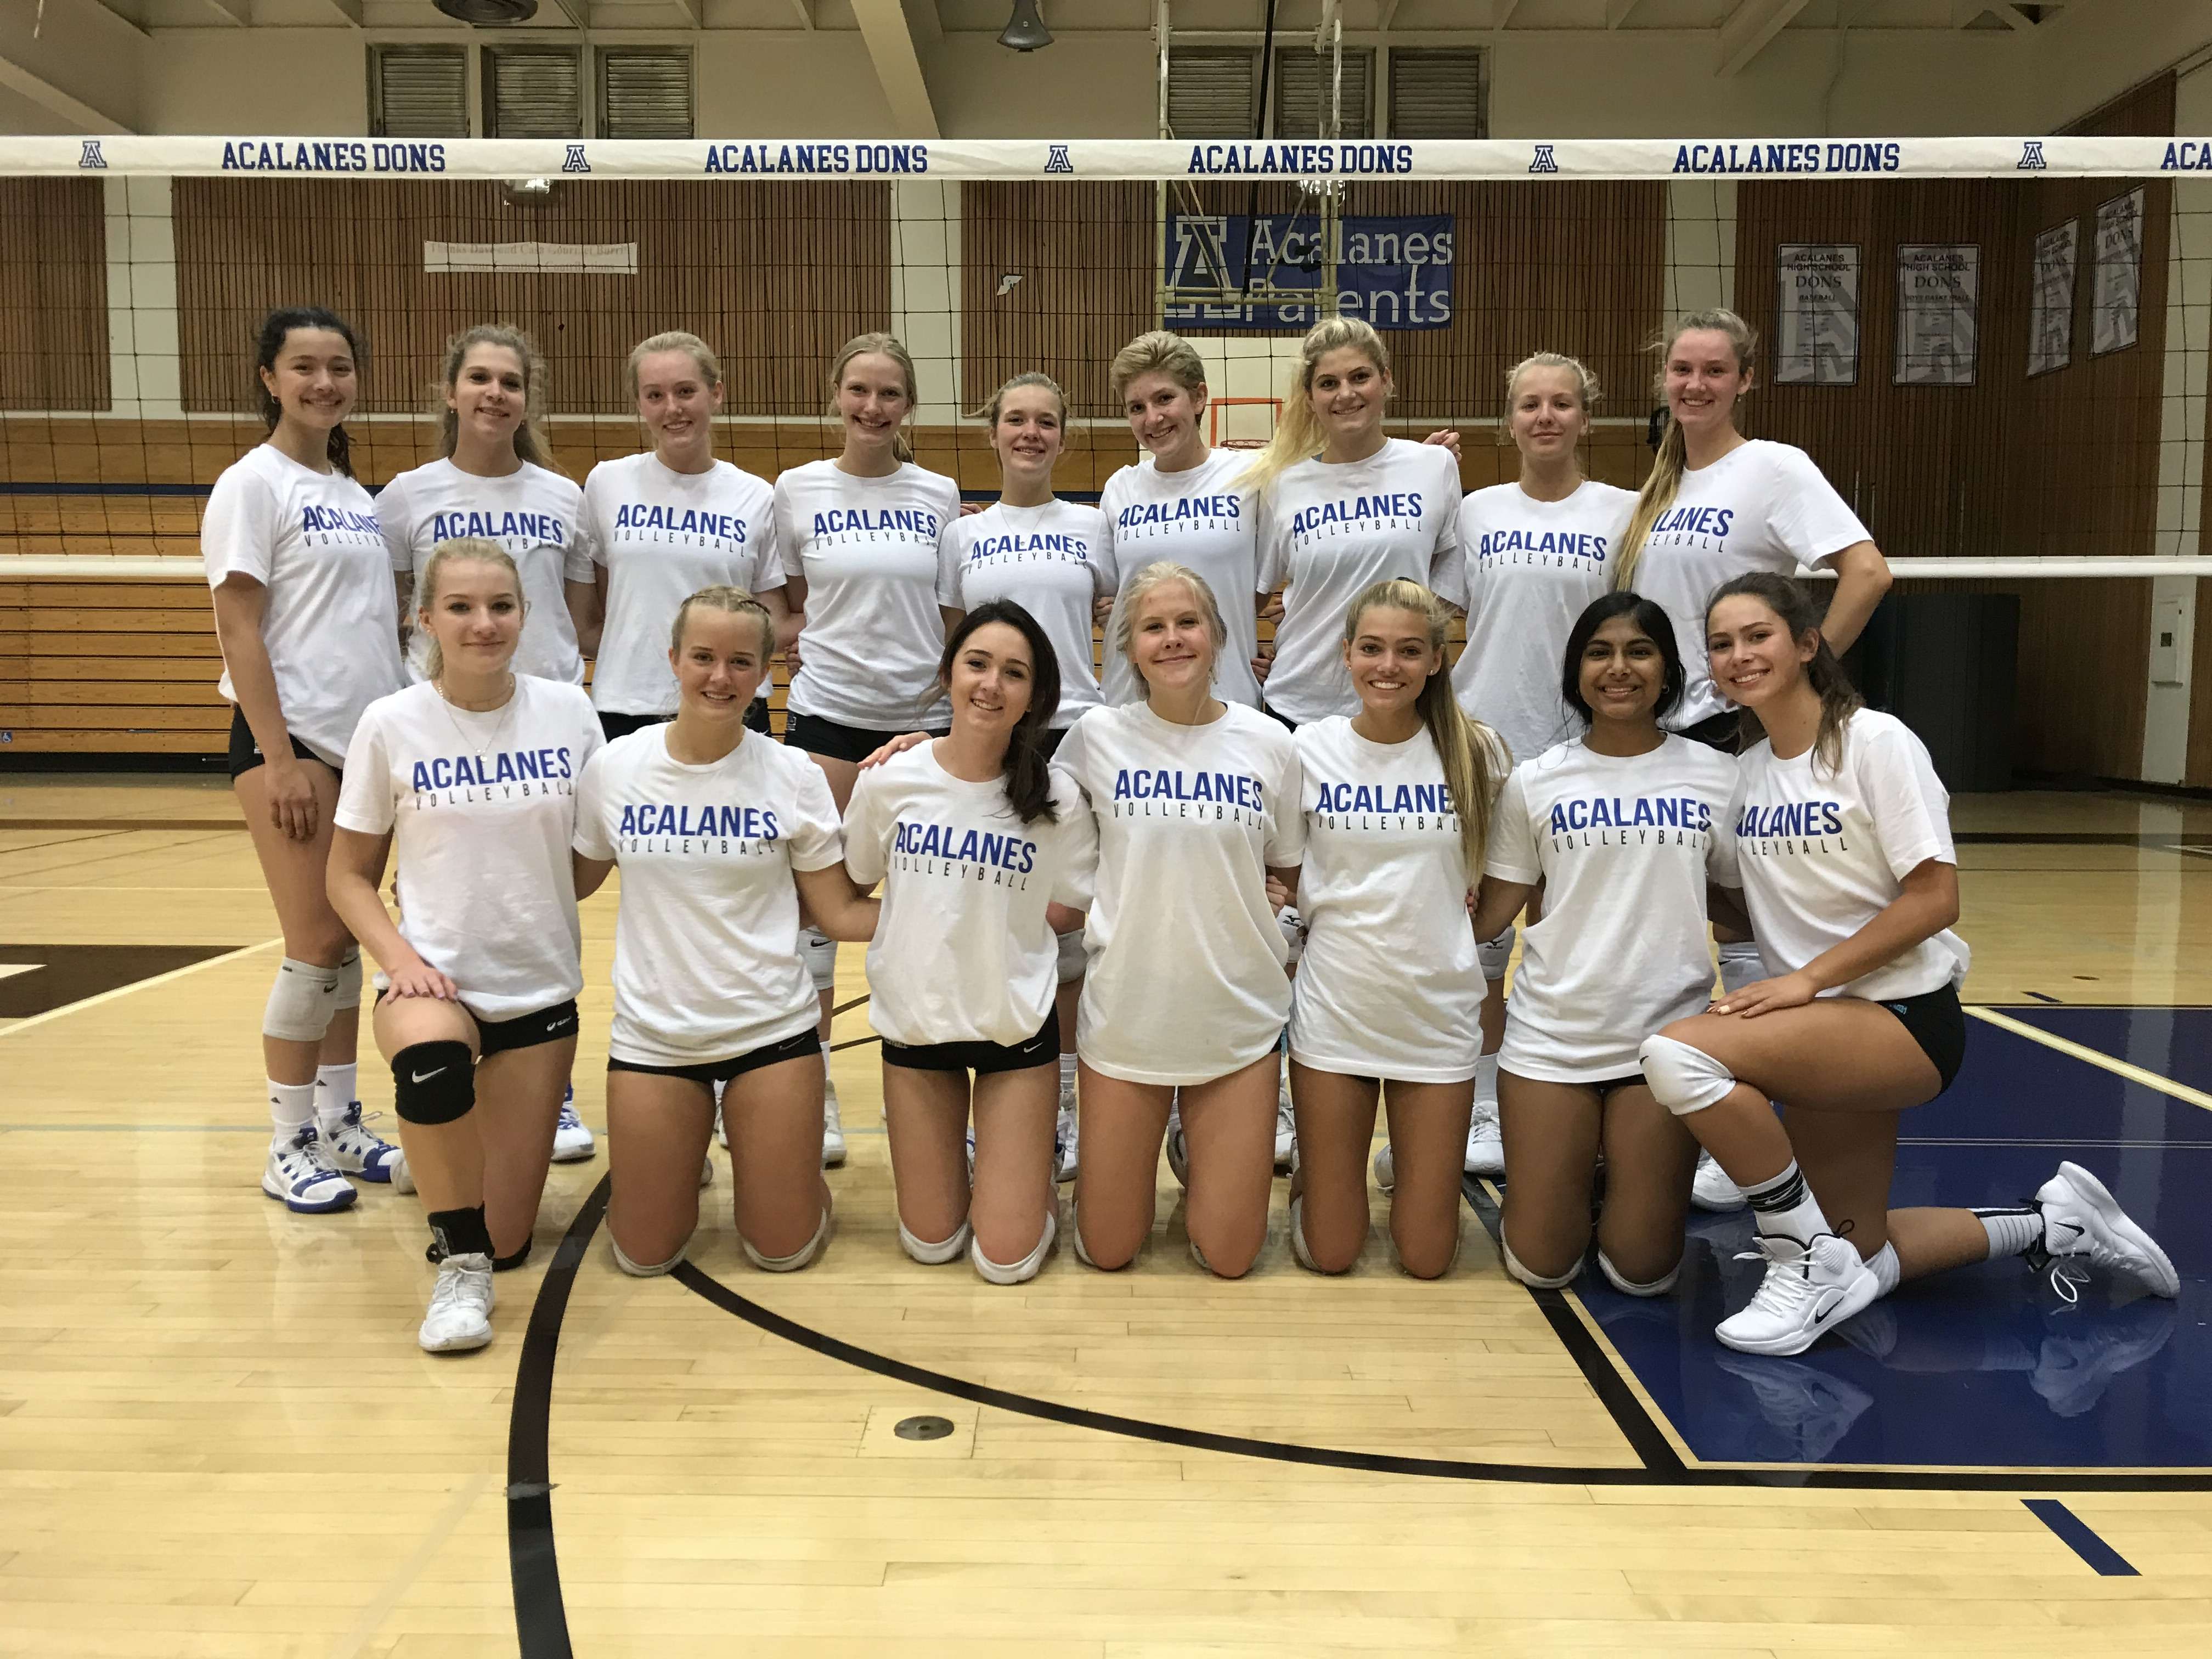 Girls Volleyball – Acalanes Boosters